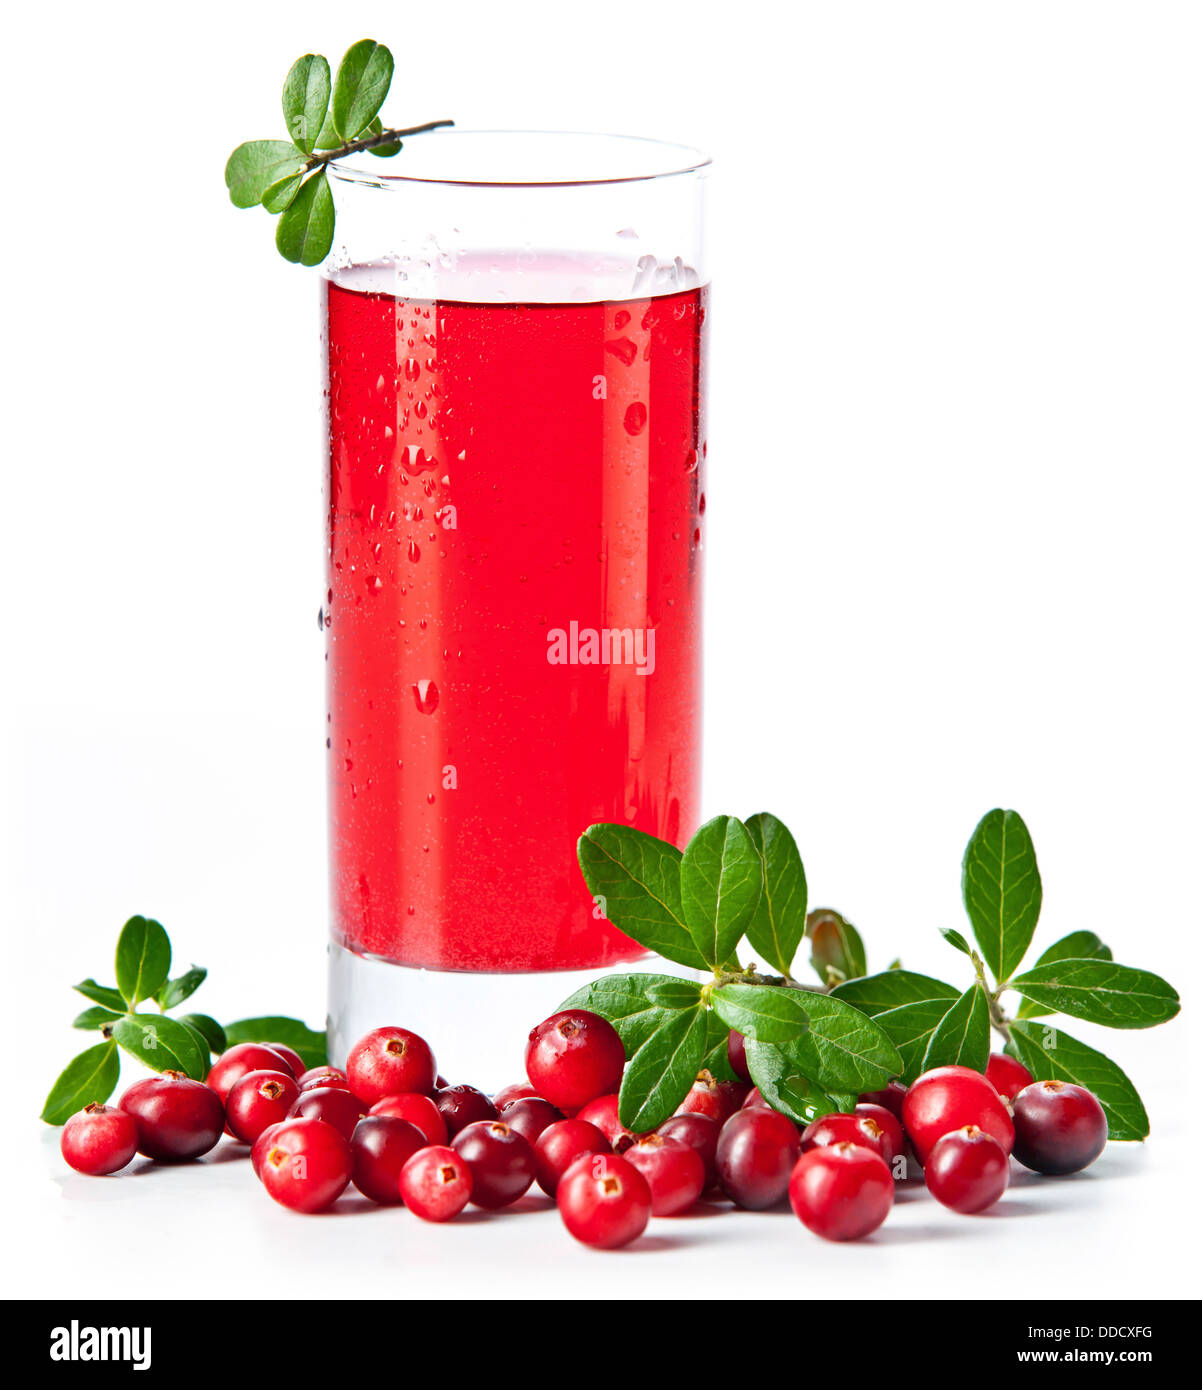 Fruit drink made from cranberries with leaves on white background Stock Photo